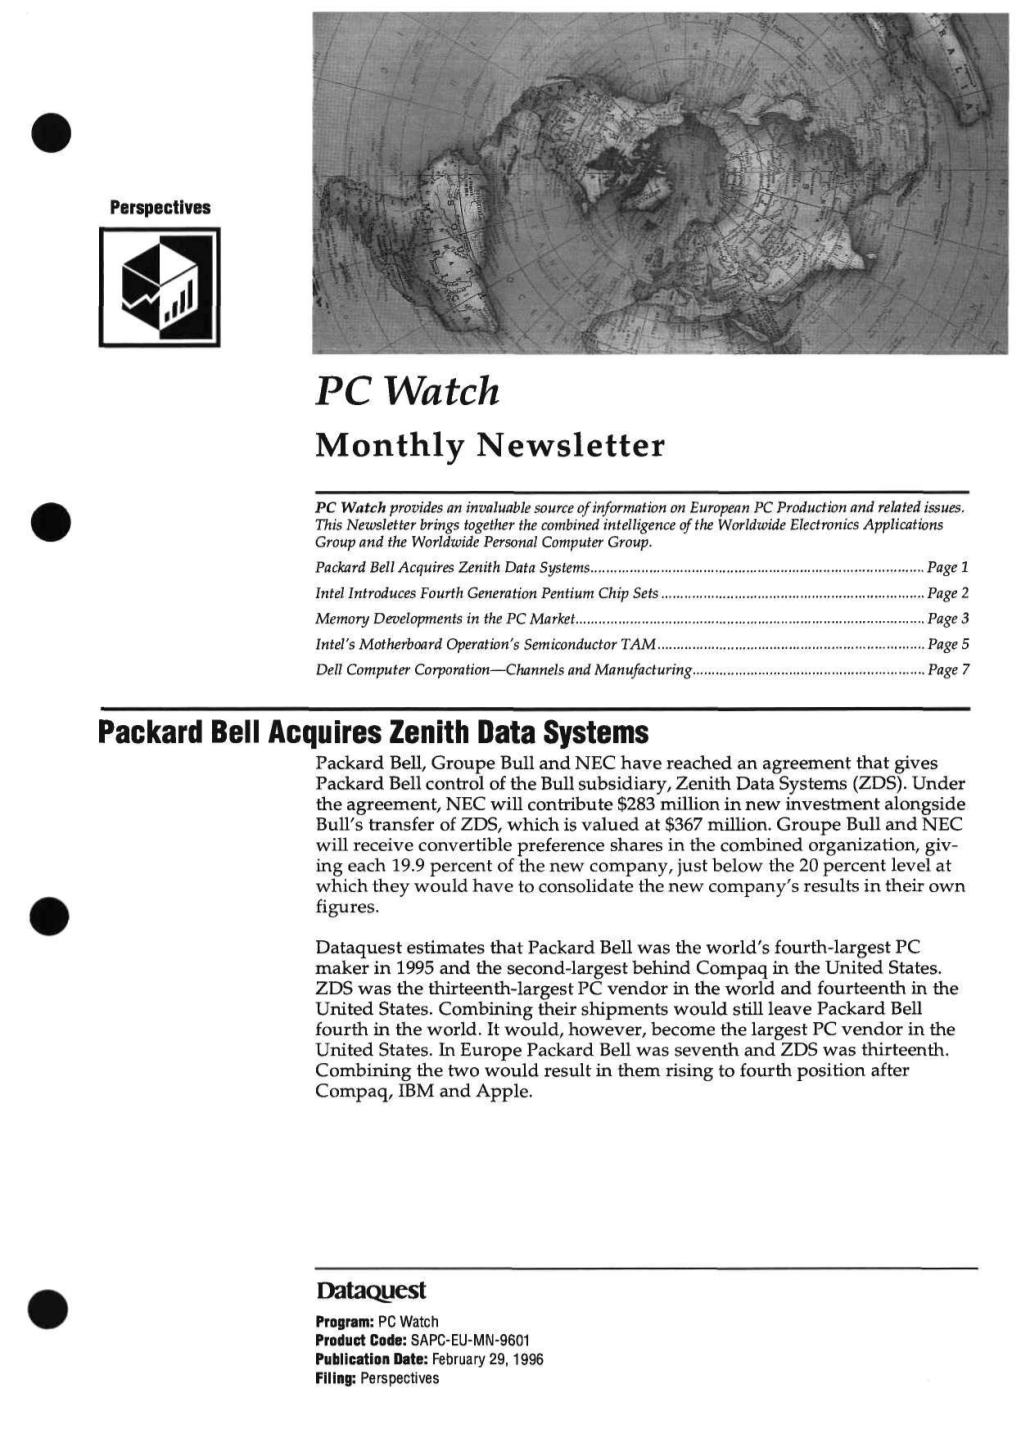 PC Watch Monthly Newsletter